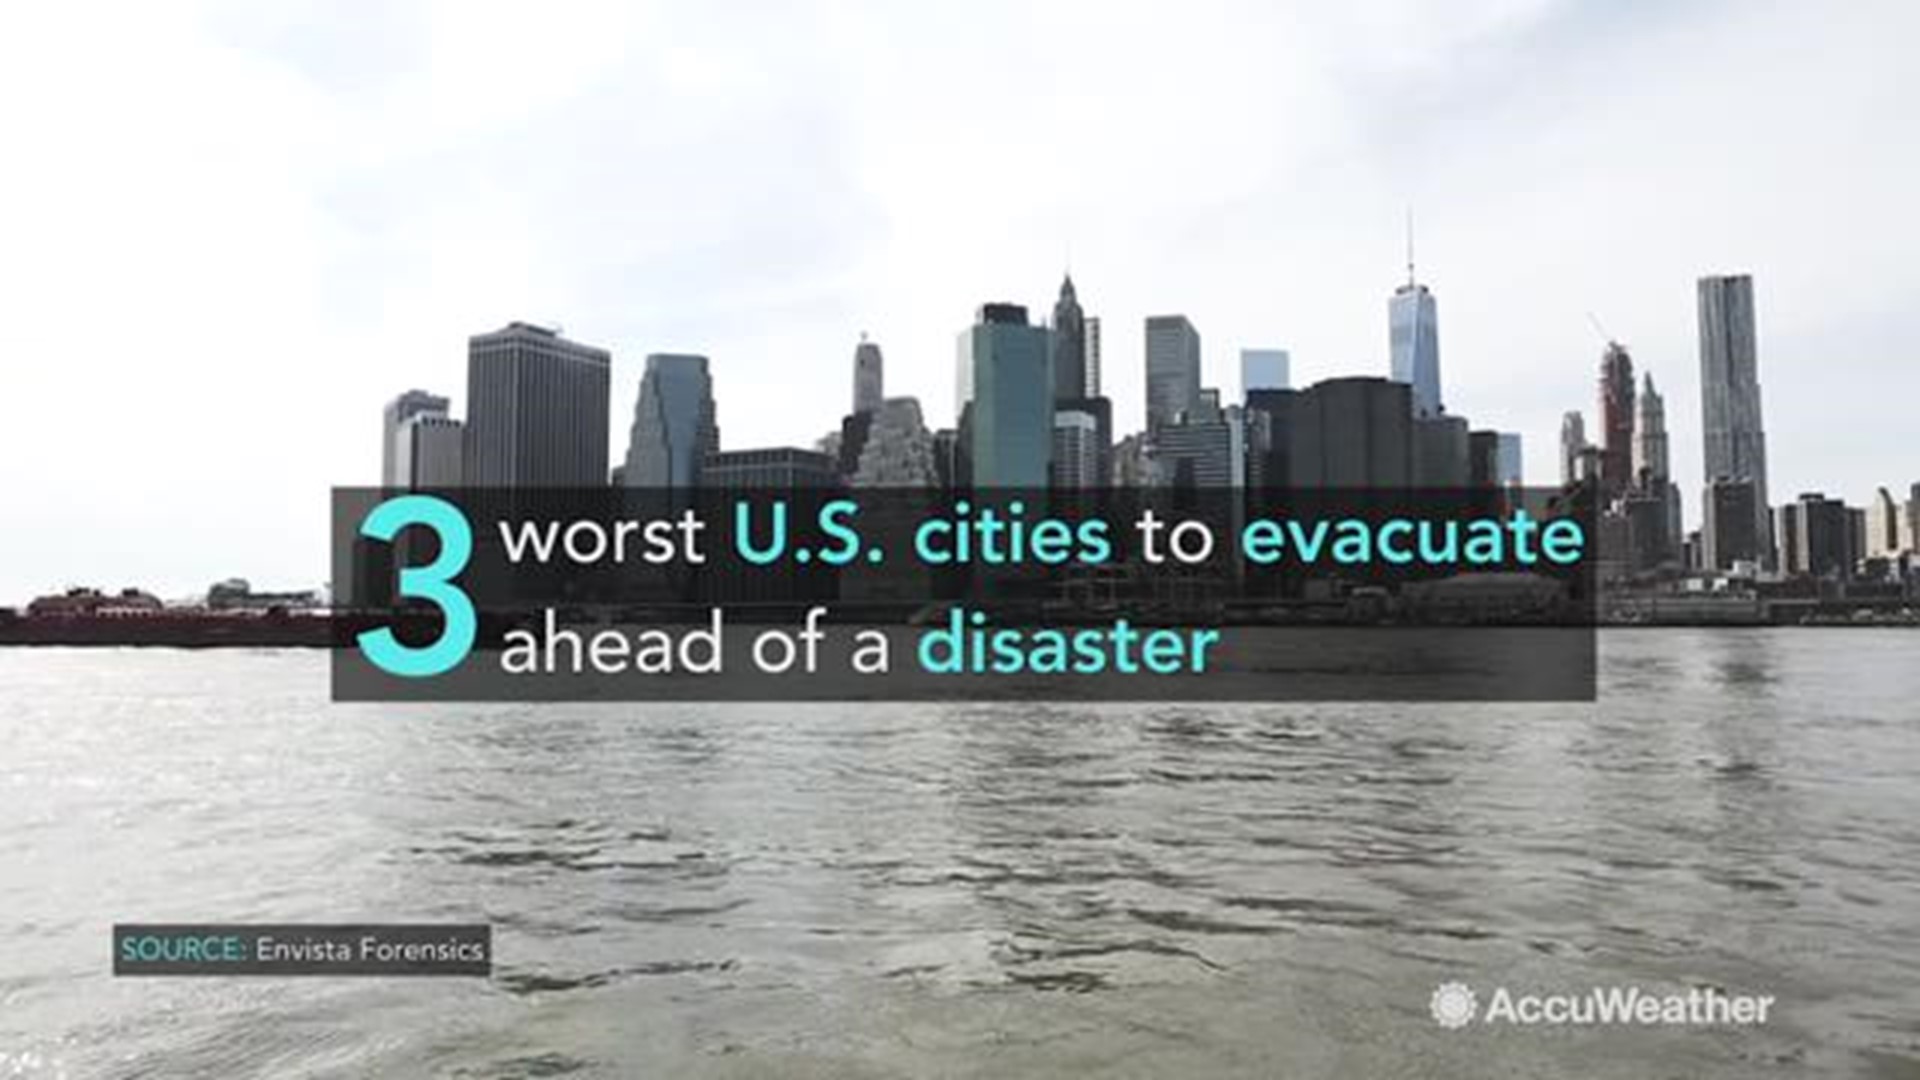 A study from Envista Forensics shows that in the event of a disaster, these three cities might have the hardest time evacuating its residents.